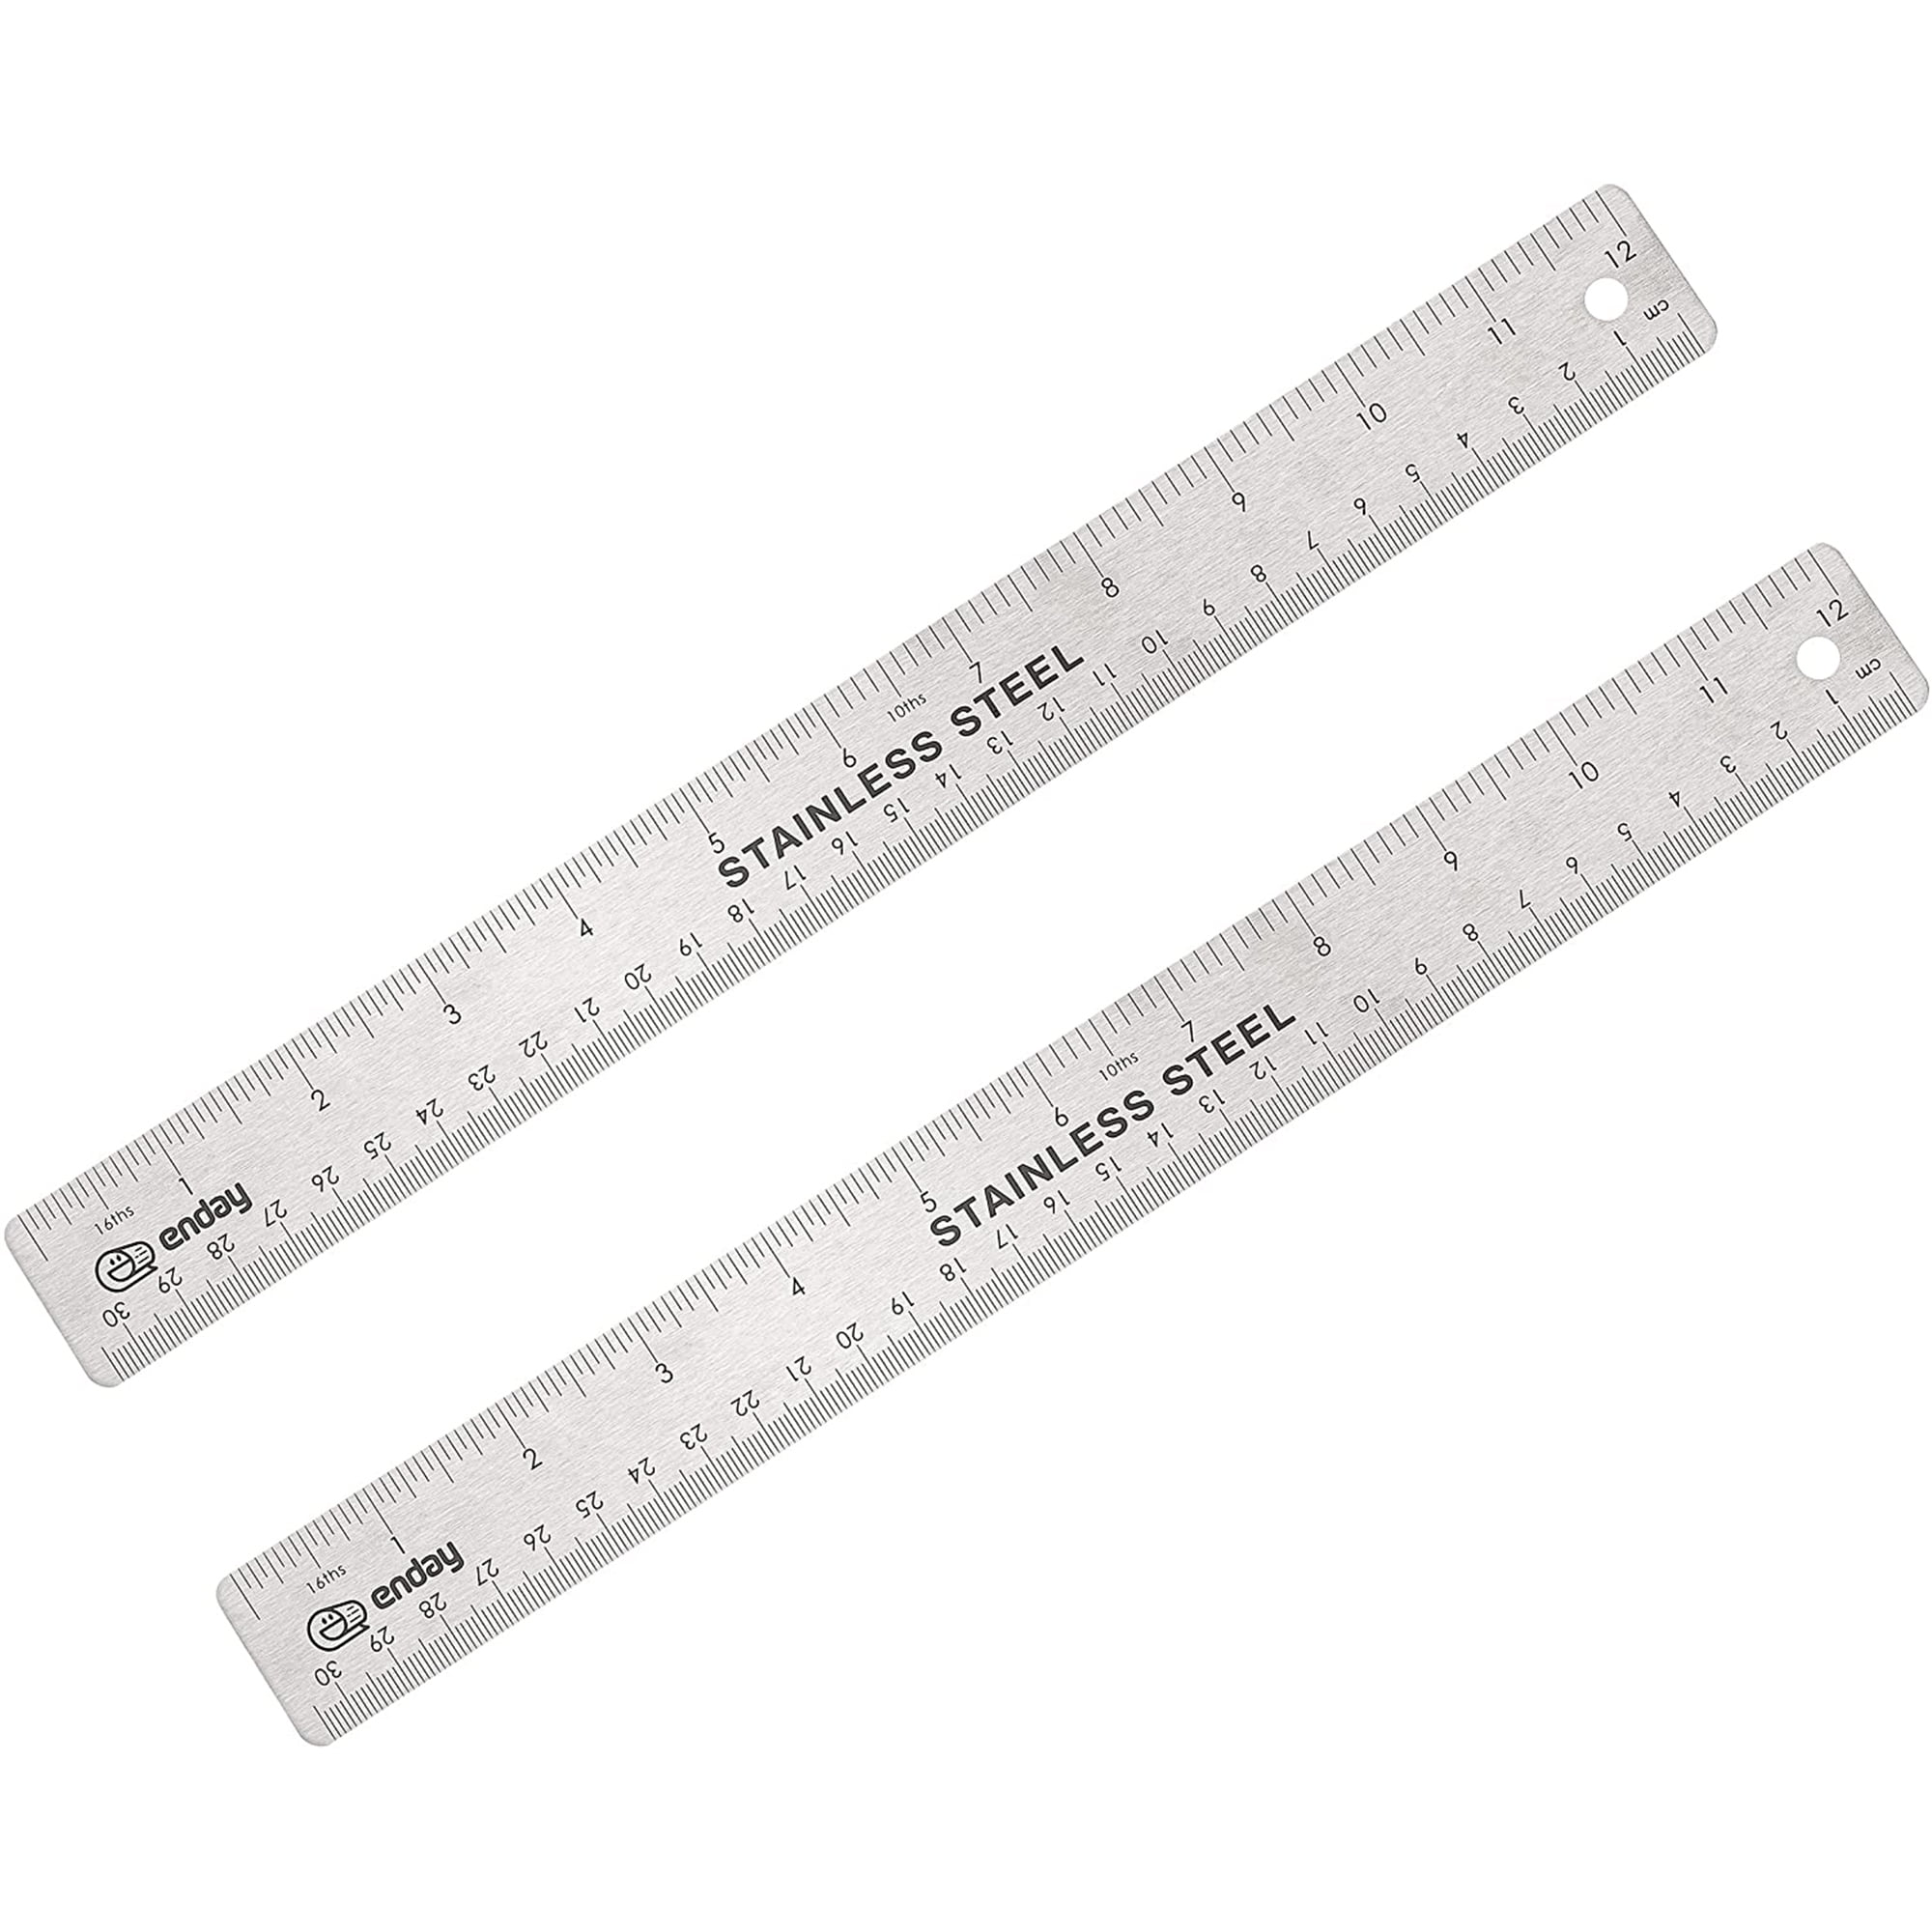 Camkey Stainless Steel Ruler 12 Inch + 6 Inch Metal Rulers X2